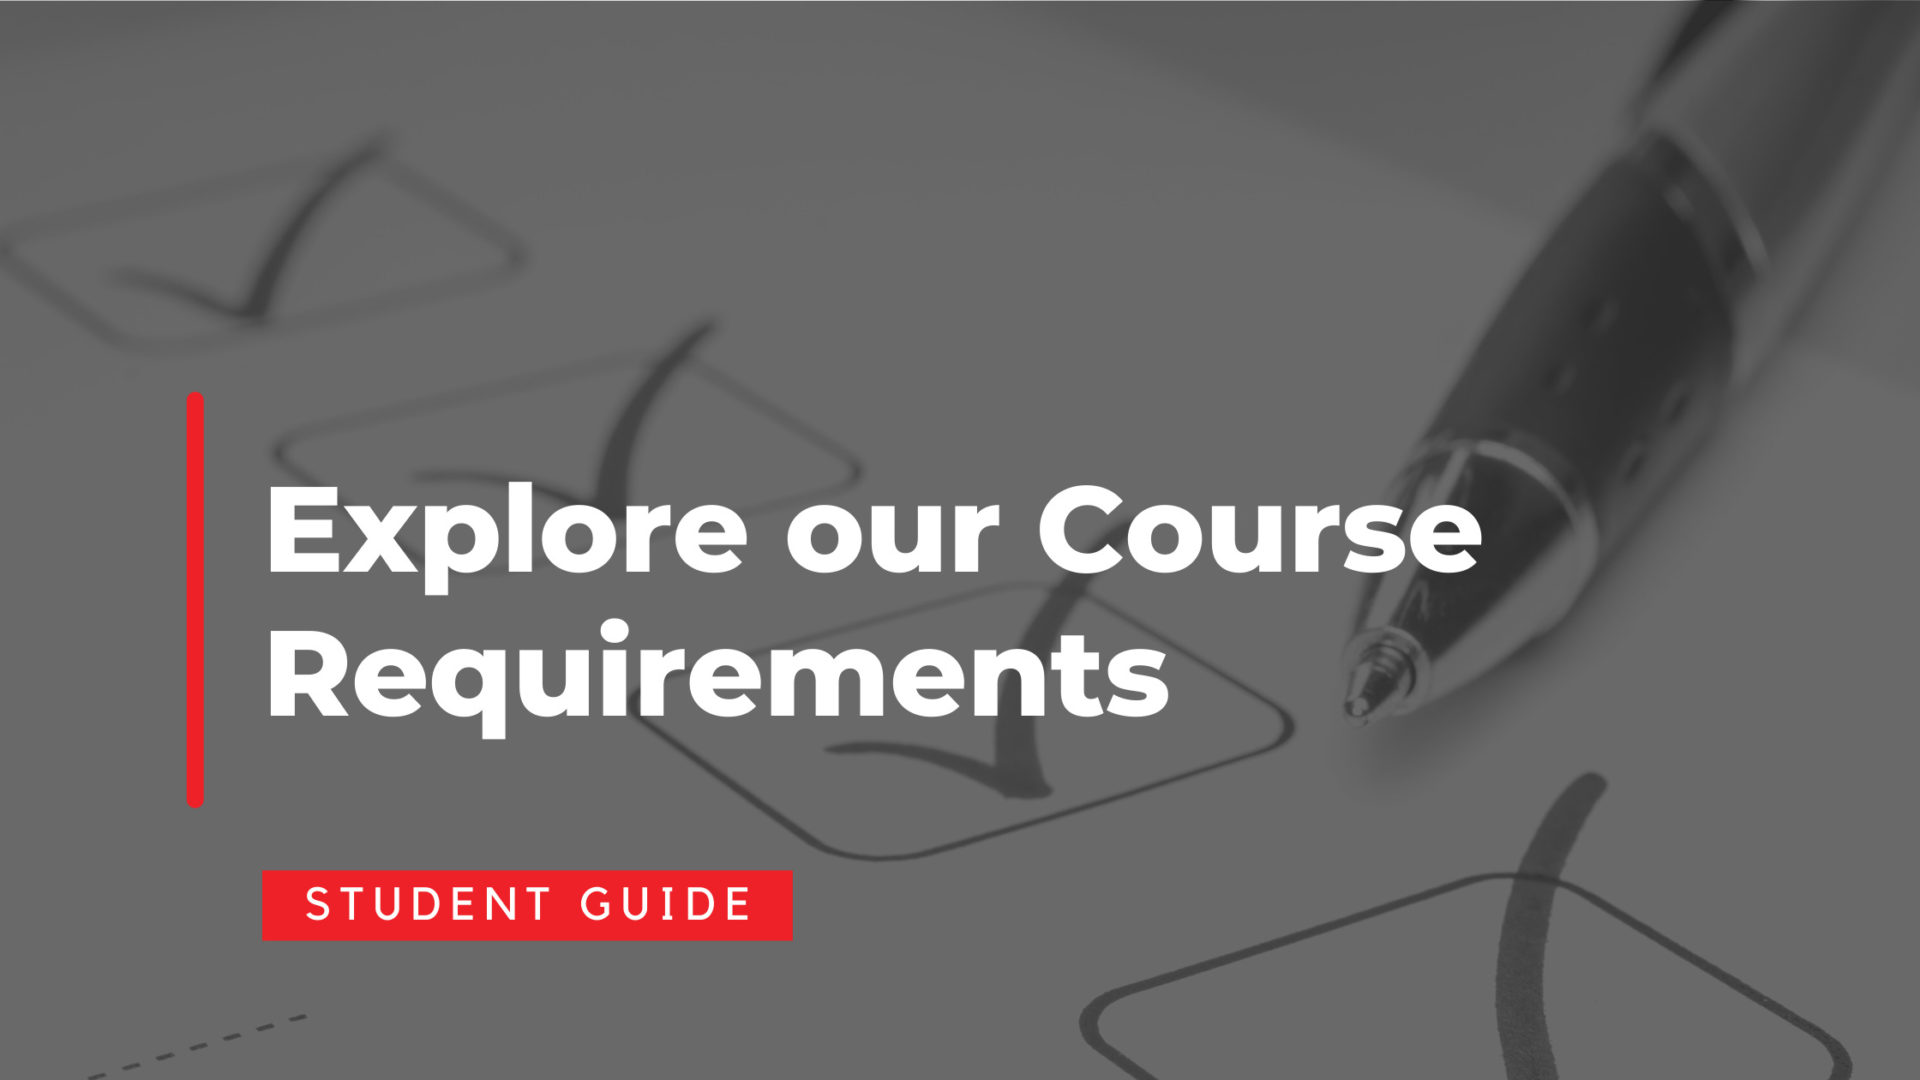 These Course Requirements Make Studying with us Super Accessible